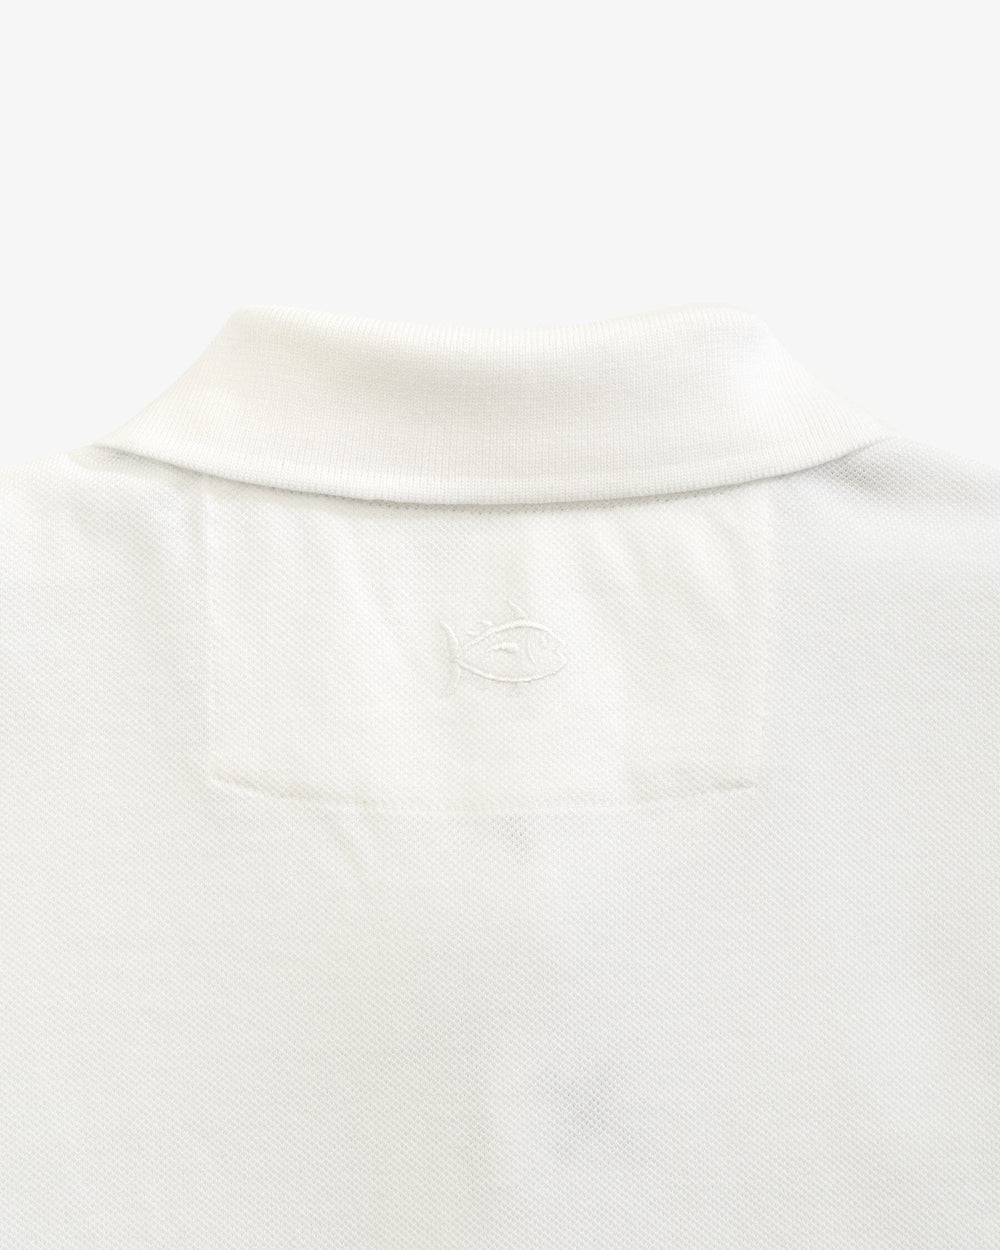 The yoke view of the Texas Christian Horned Frogs Skipjack Polo by Southern Tide - Classic White